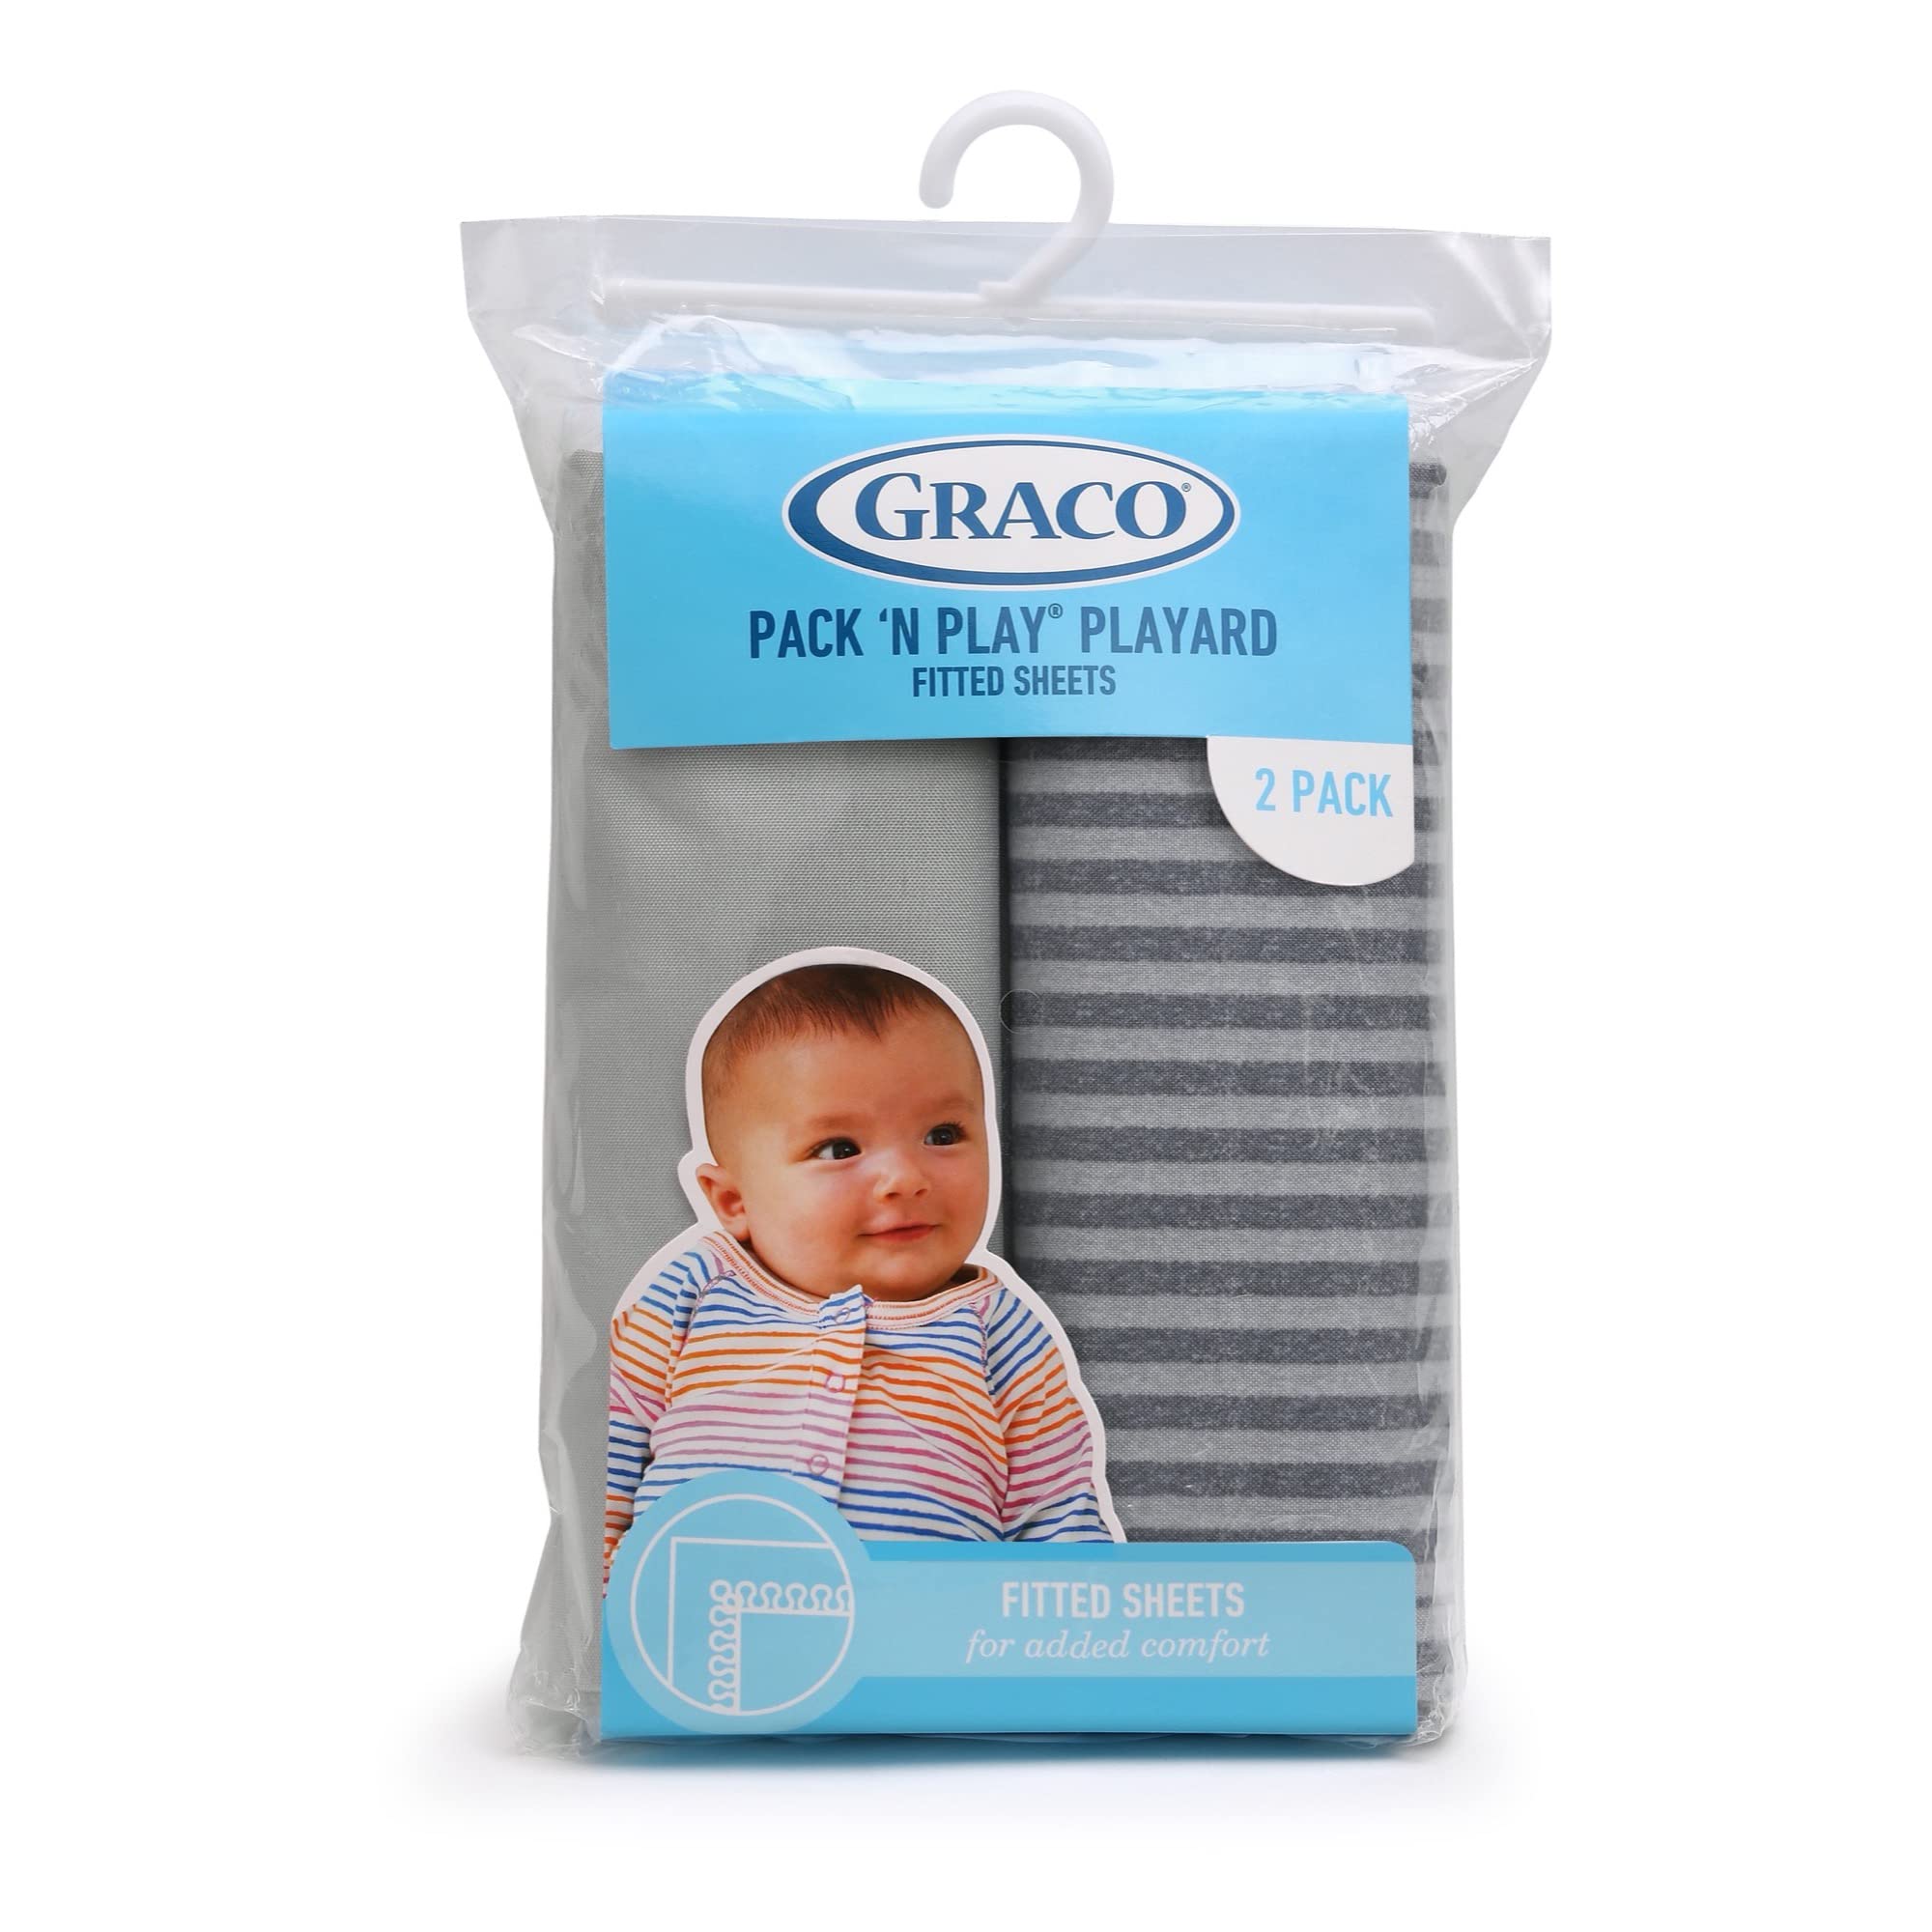 Graco® Pack ‘n Play® Playard Fitted Sheets, 2 Pack, Stripes and Grey